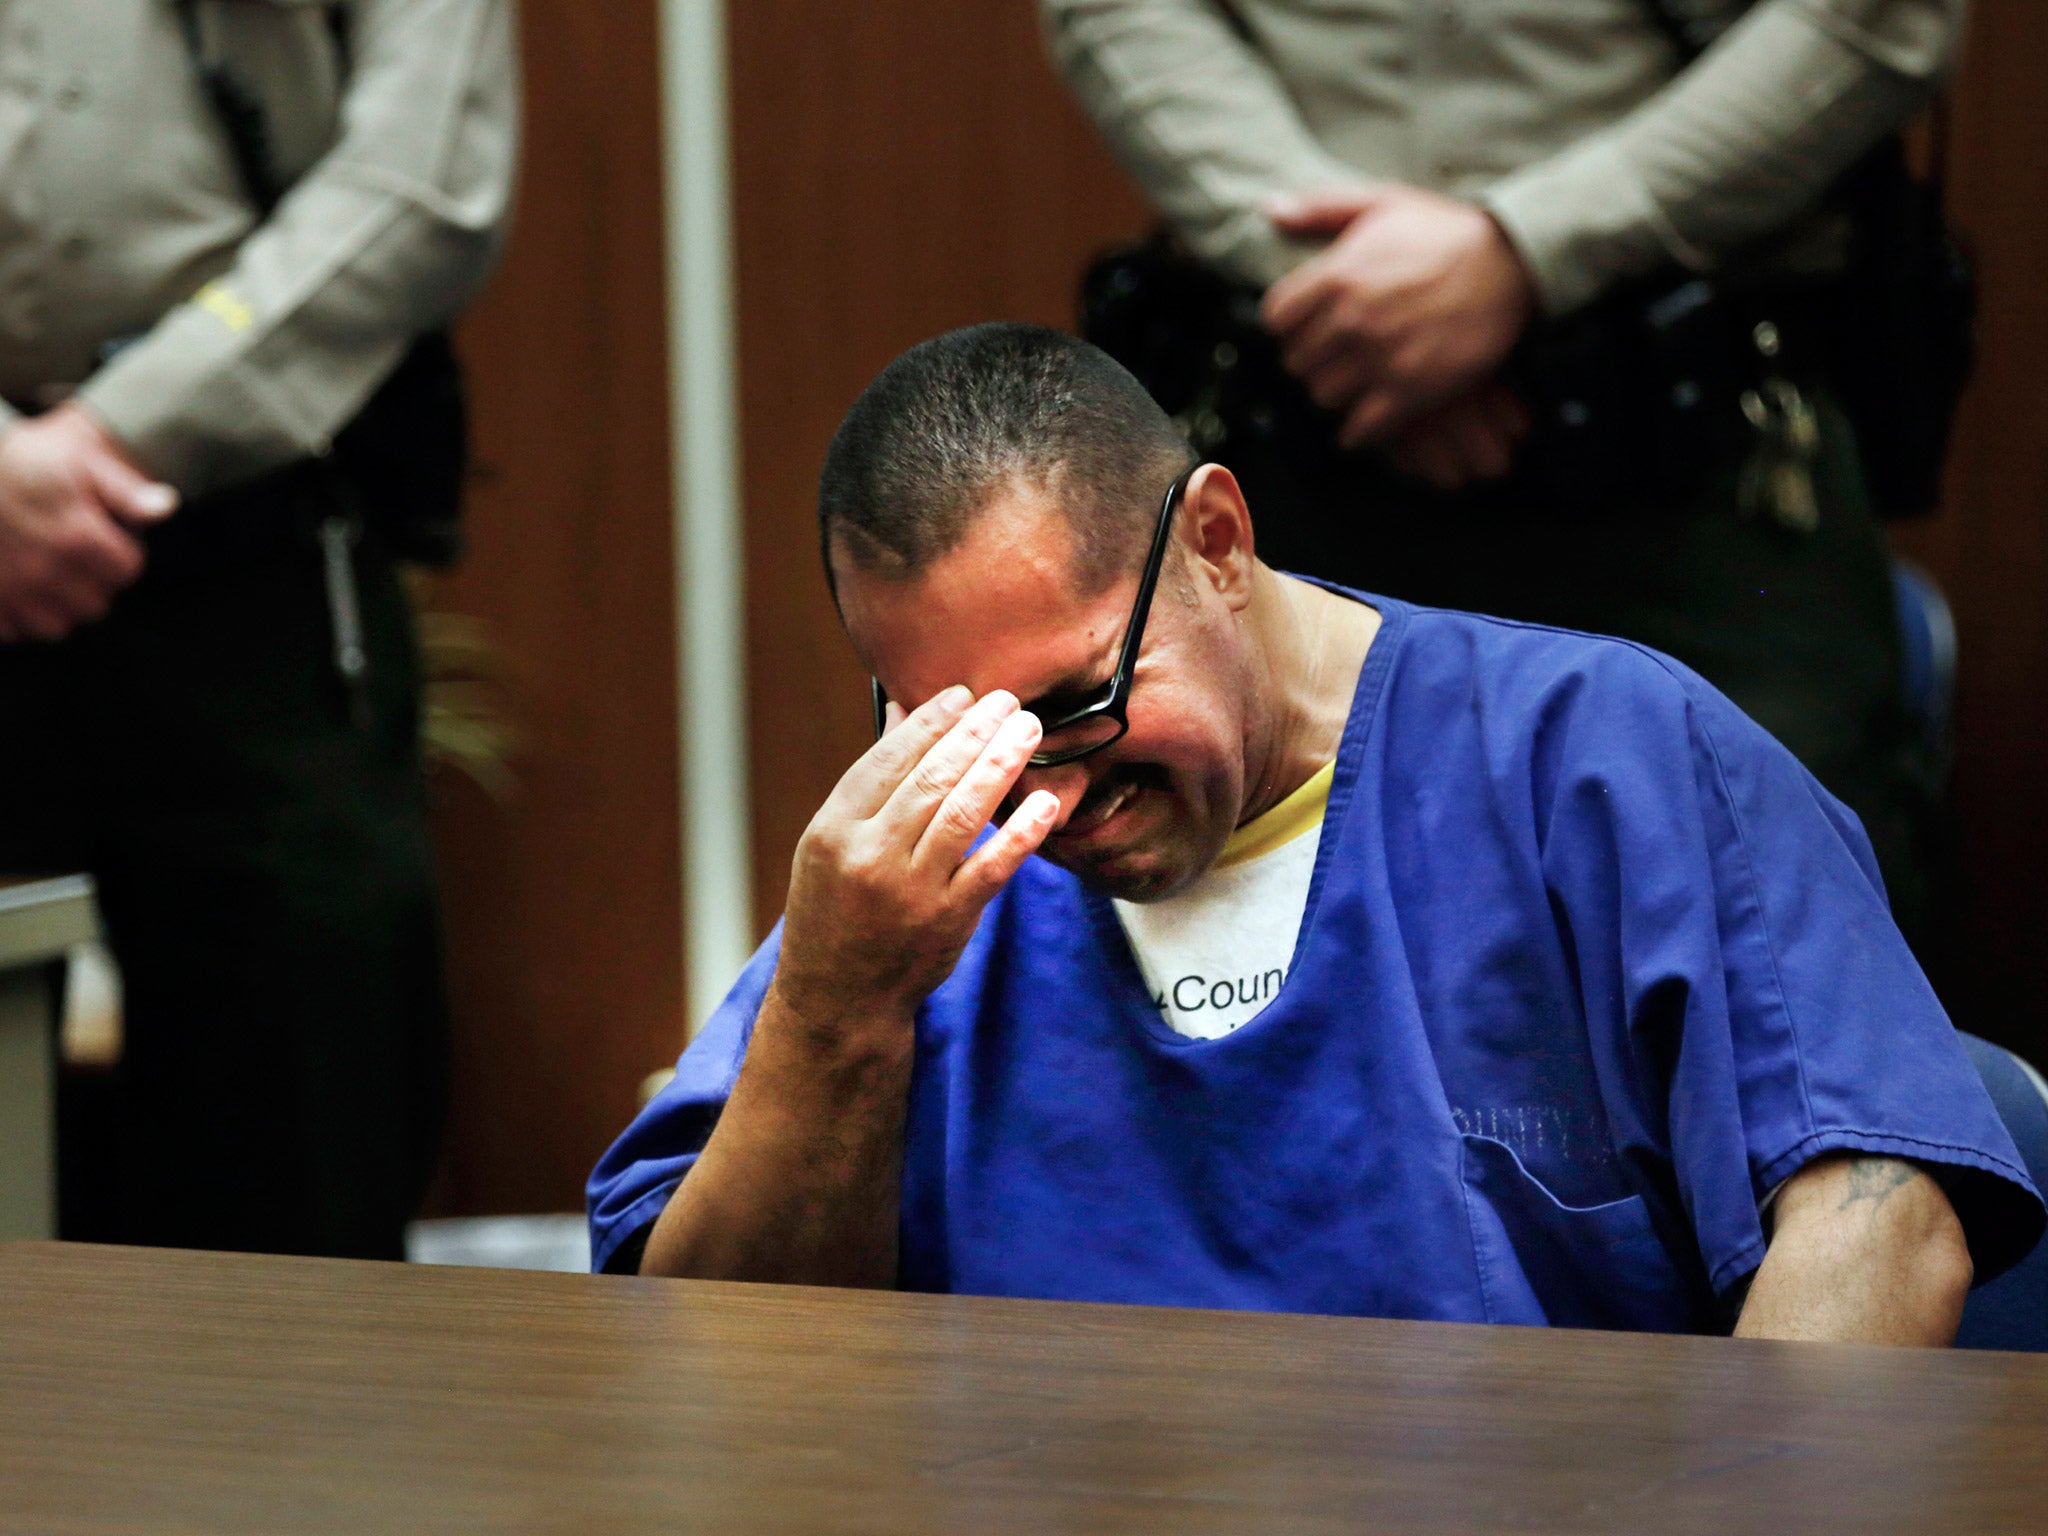 Luis Vargas, who has been in prison for 16 years, breaks down in court.